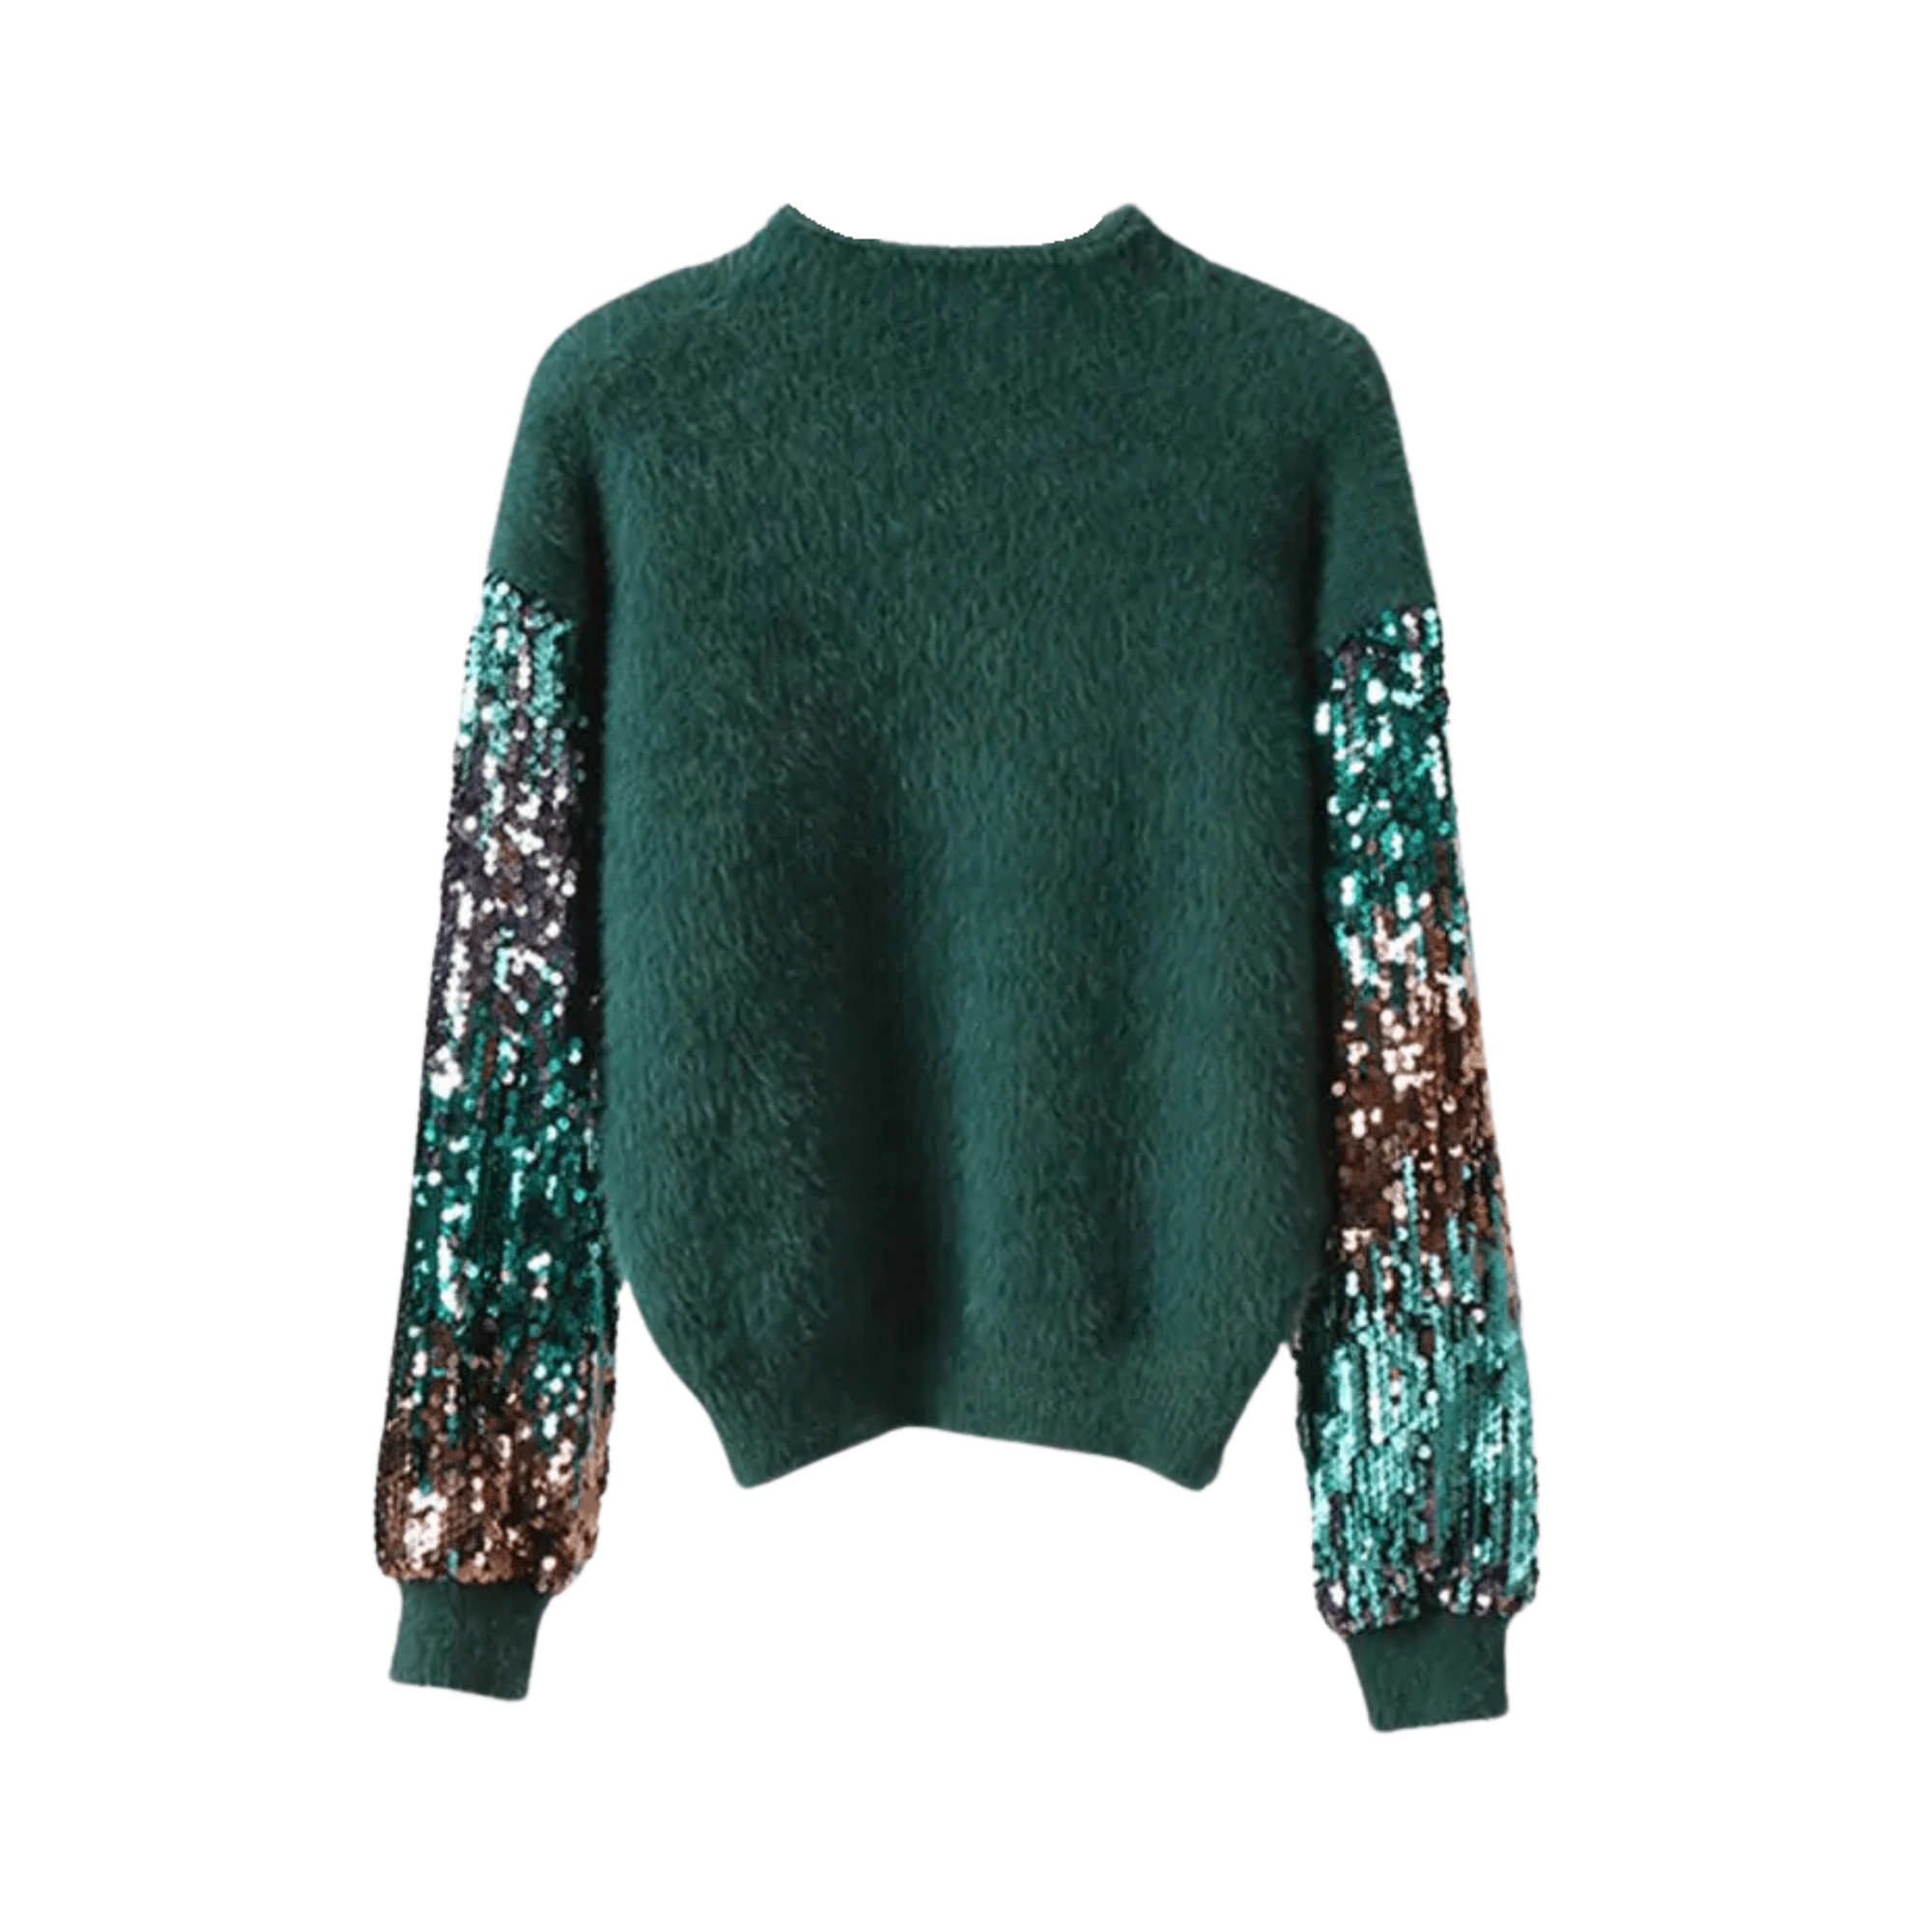 Sequined Sleeves Knit Sweater - Kelly Obi New York